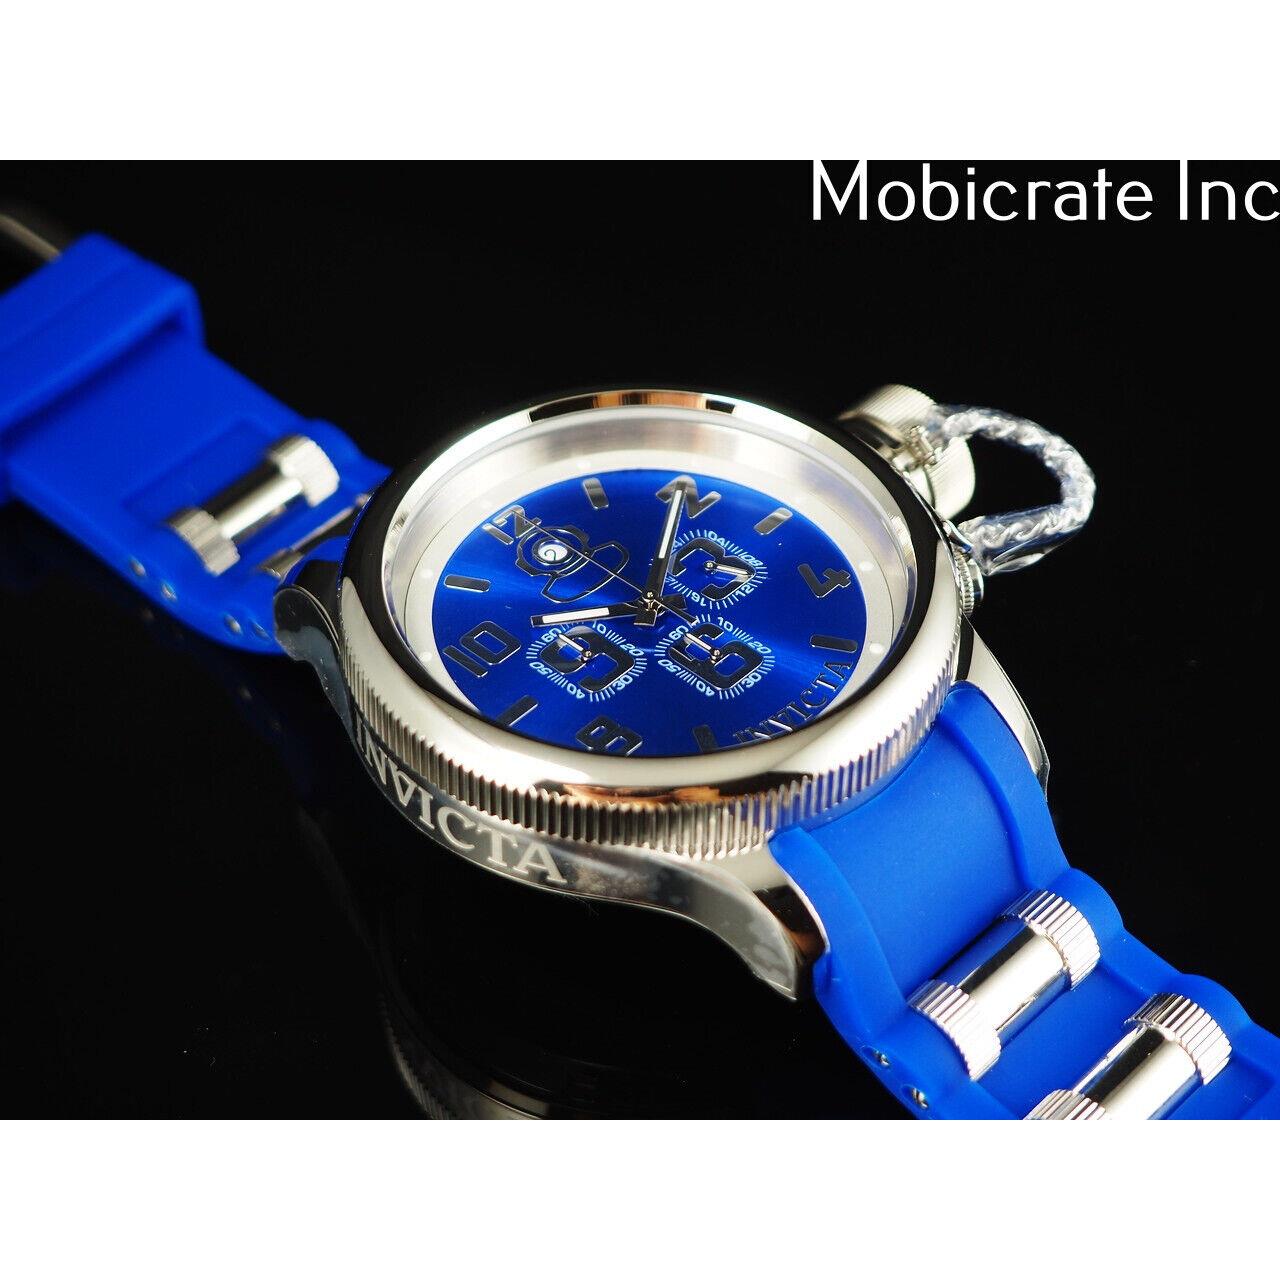 Invicta watch Russian Diver - Blue Dial, Blue Band, Silver Bezel